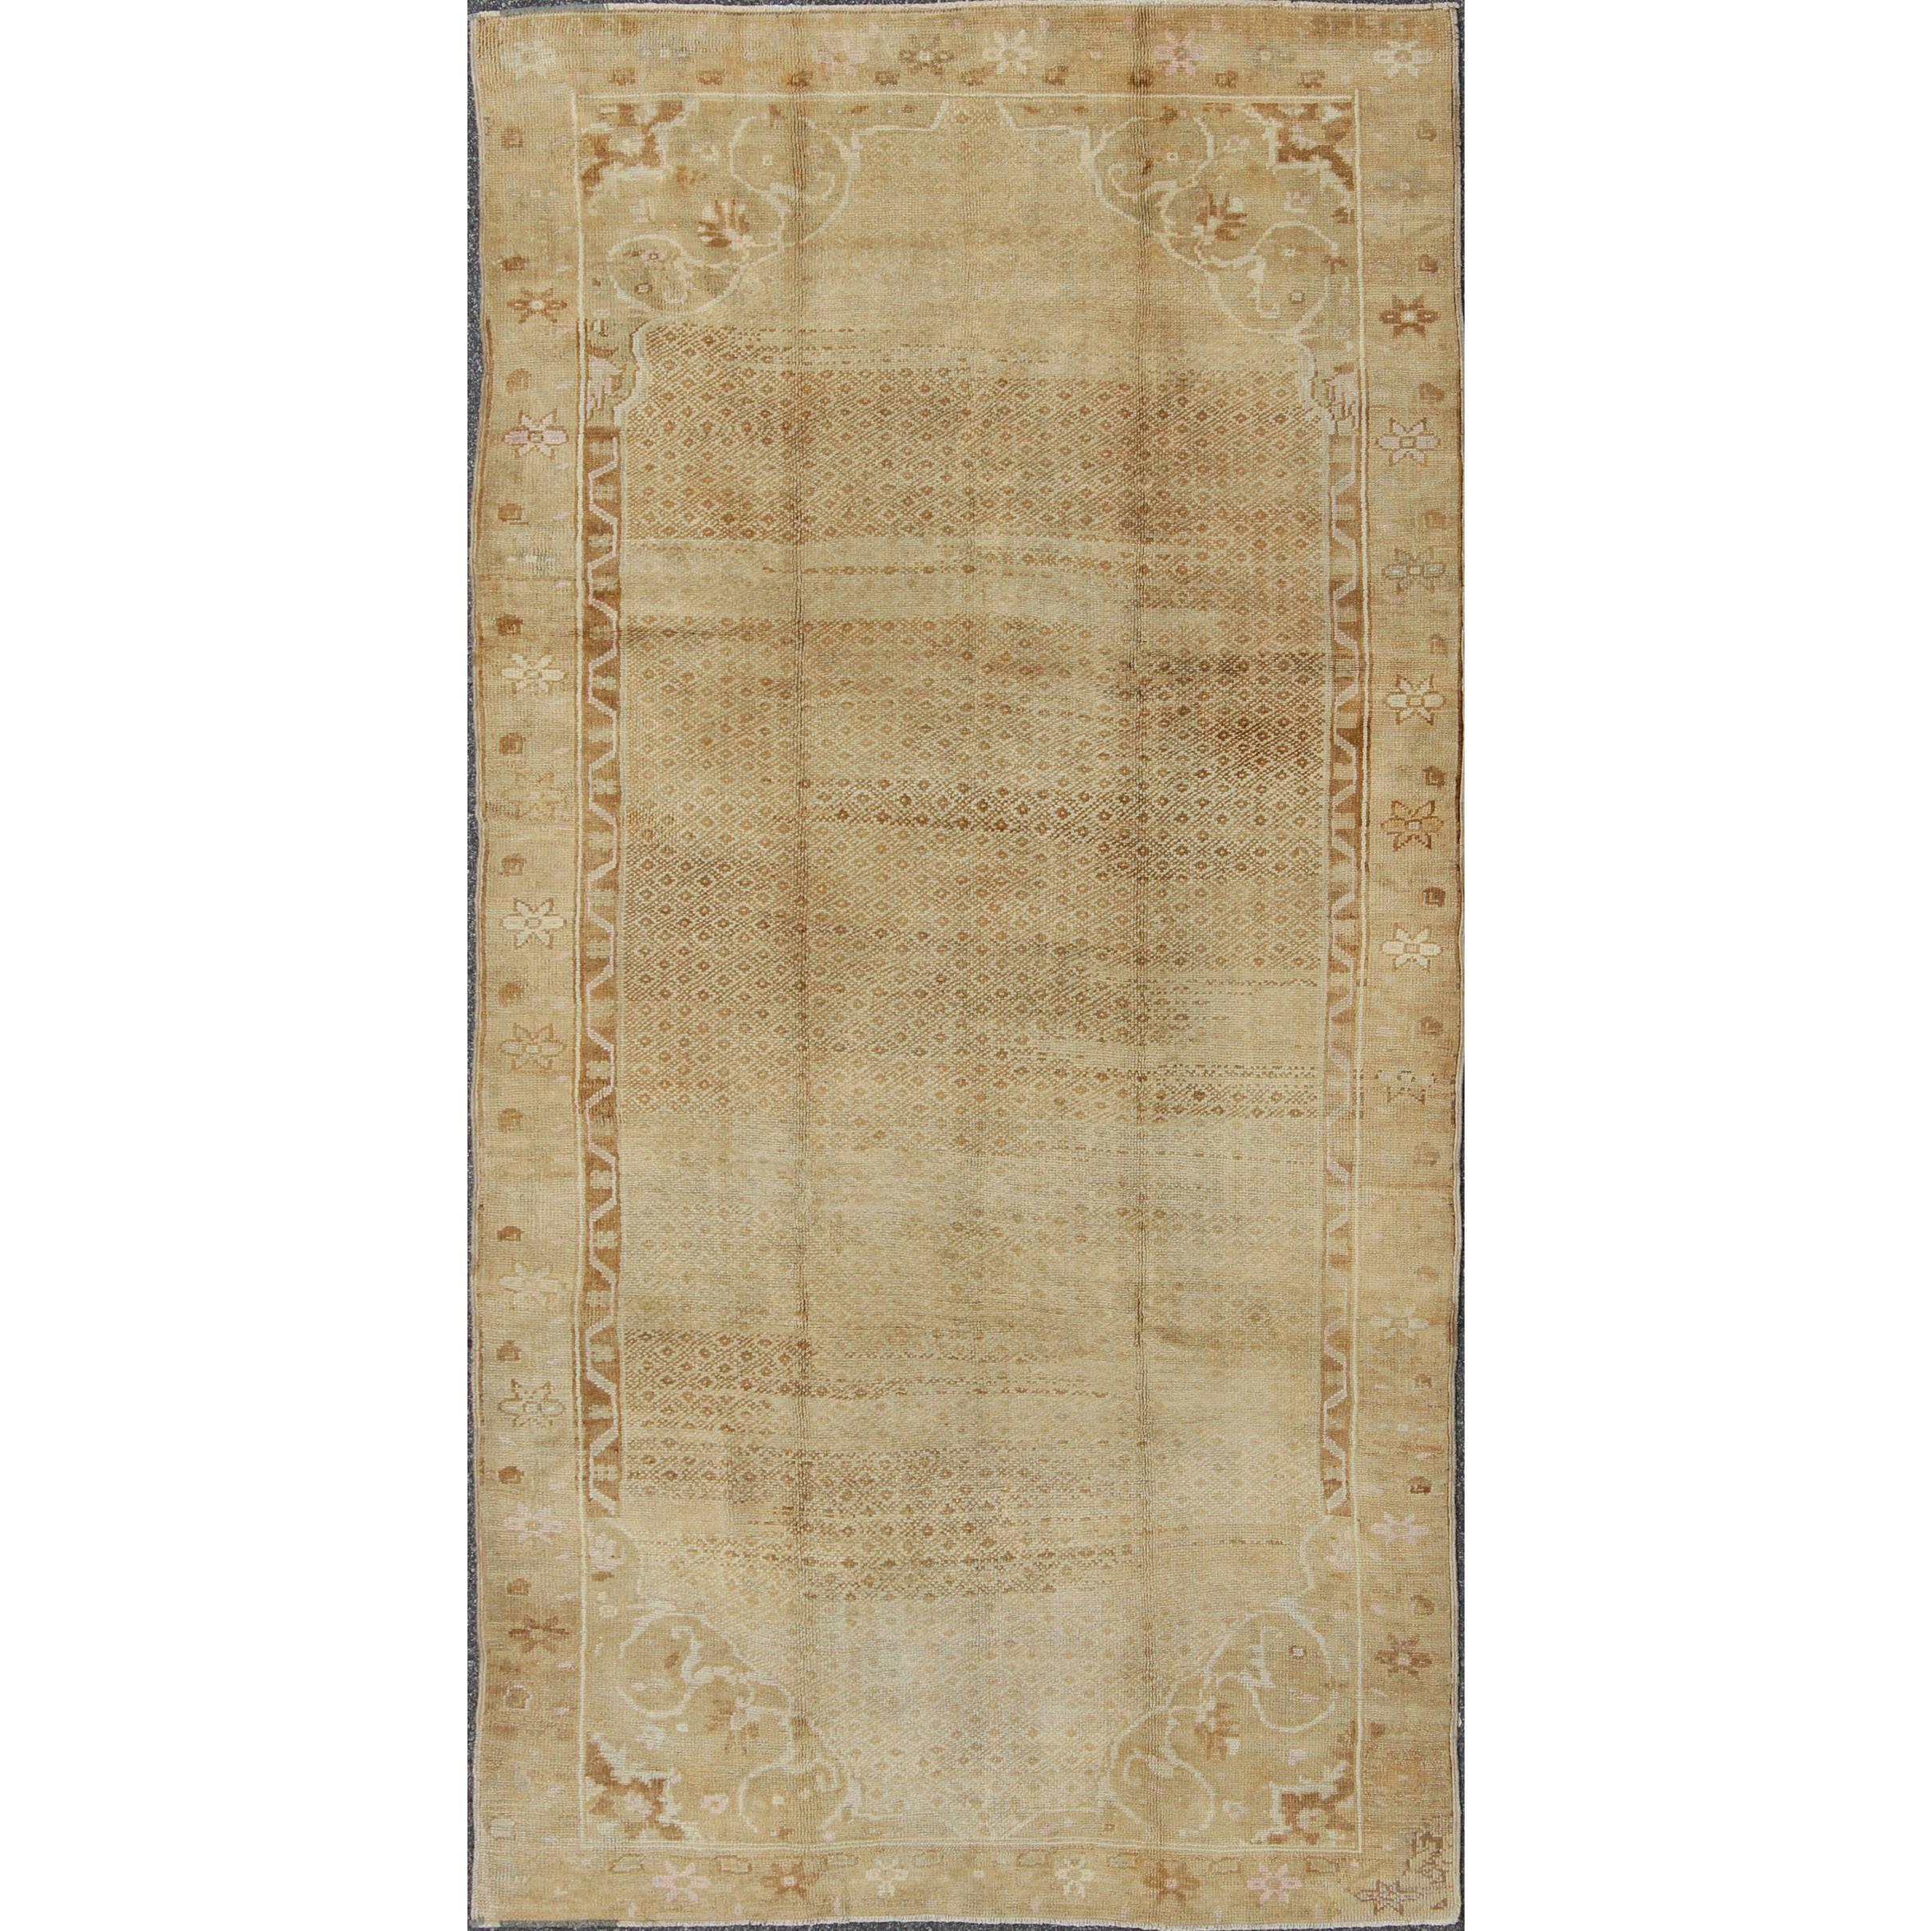 Tan Vintage Turkish Oushak Rug with All-Over Diamond Design and Floral Border For Sale